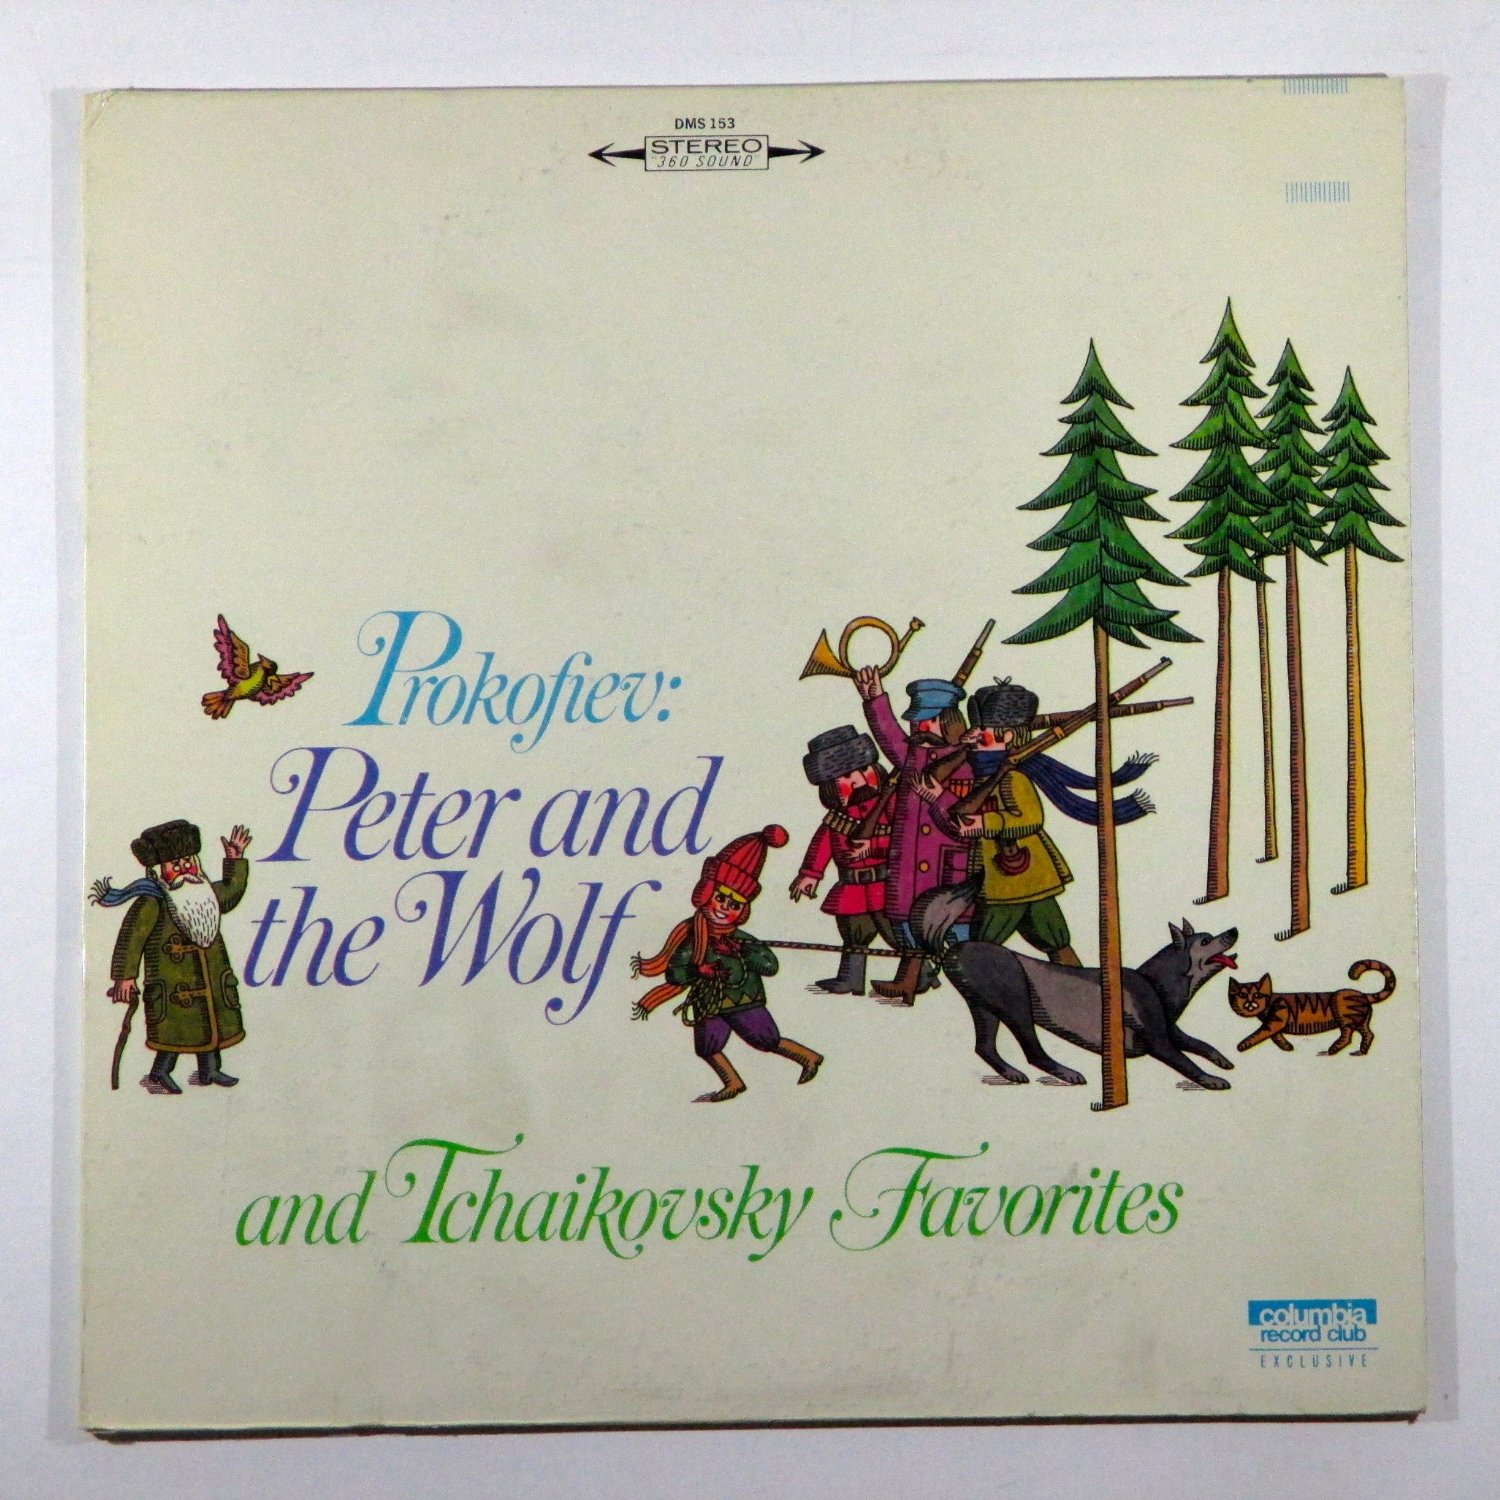 Prokofiev: Peter and the Wolf and Tchaikovsky Favorites